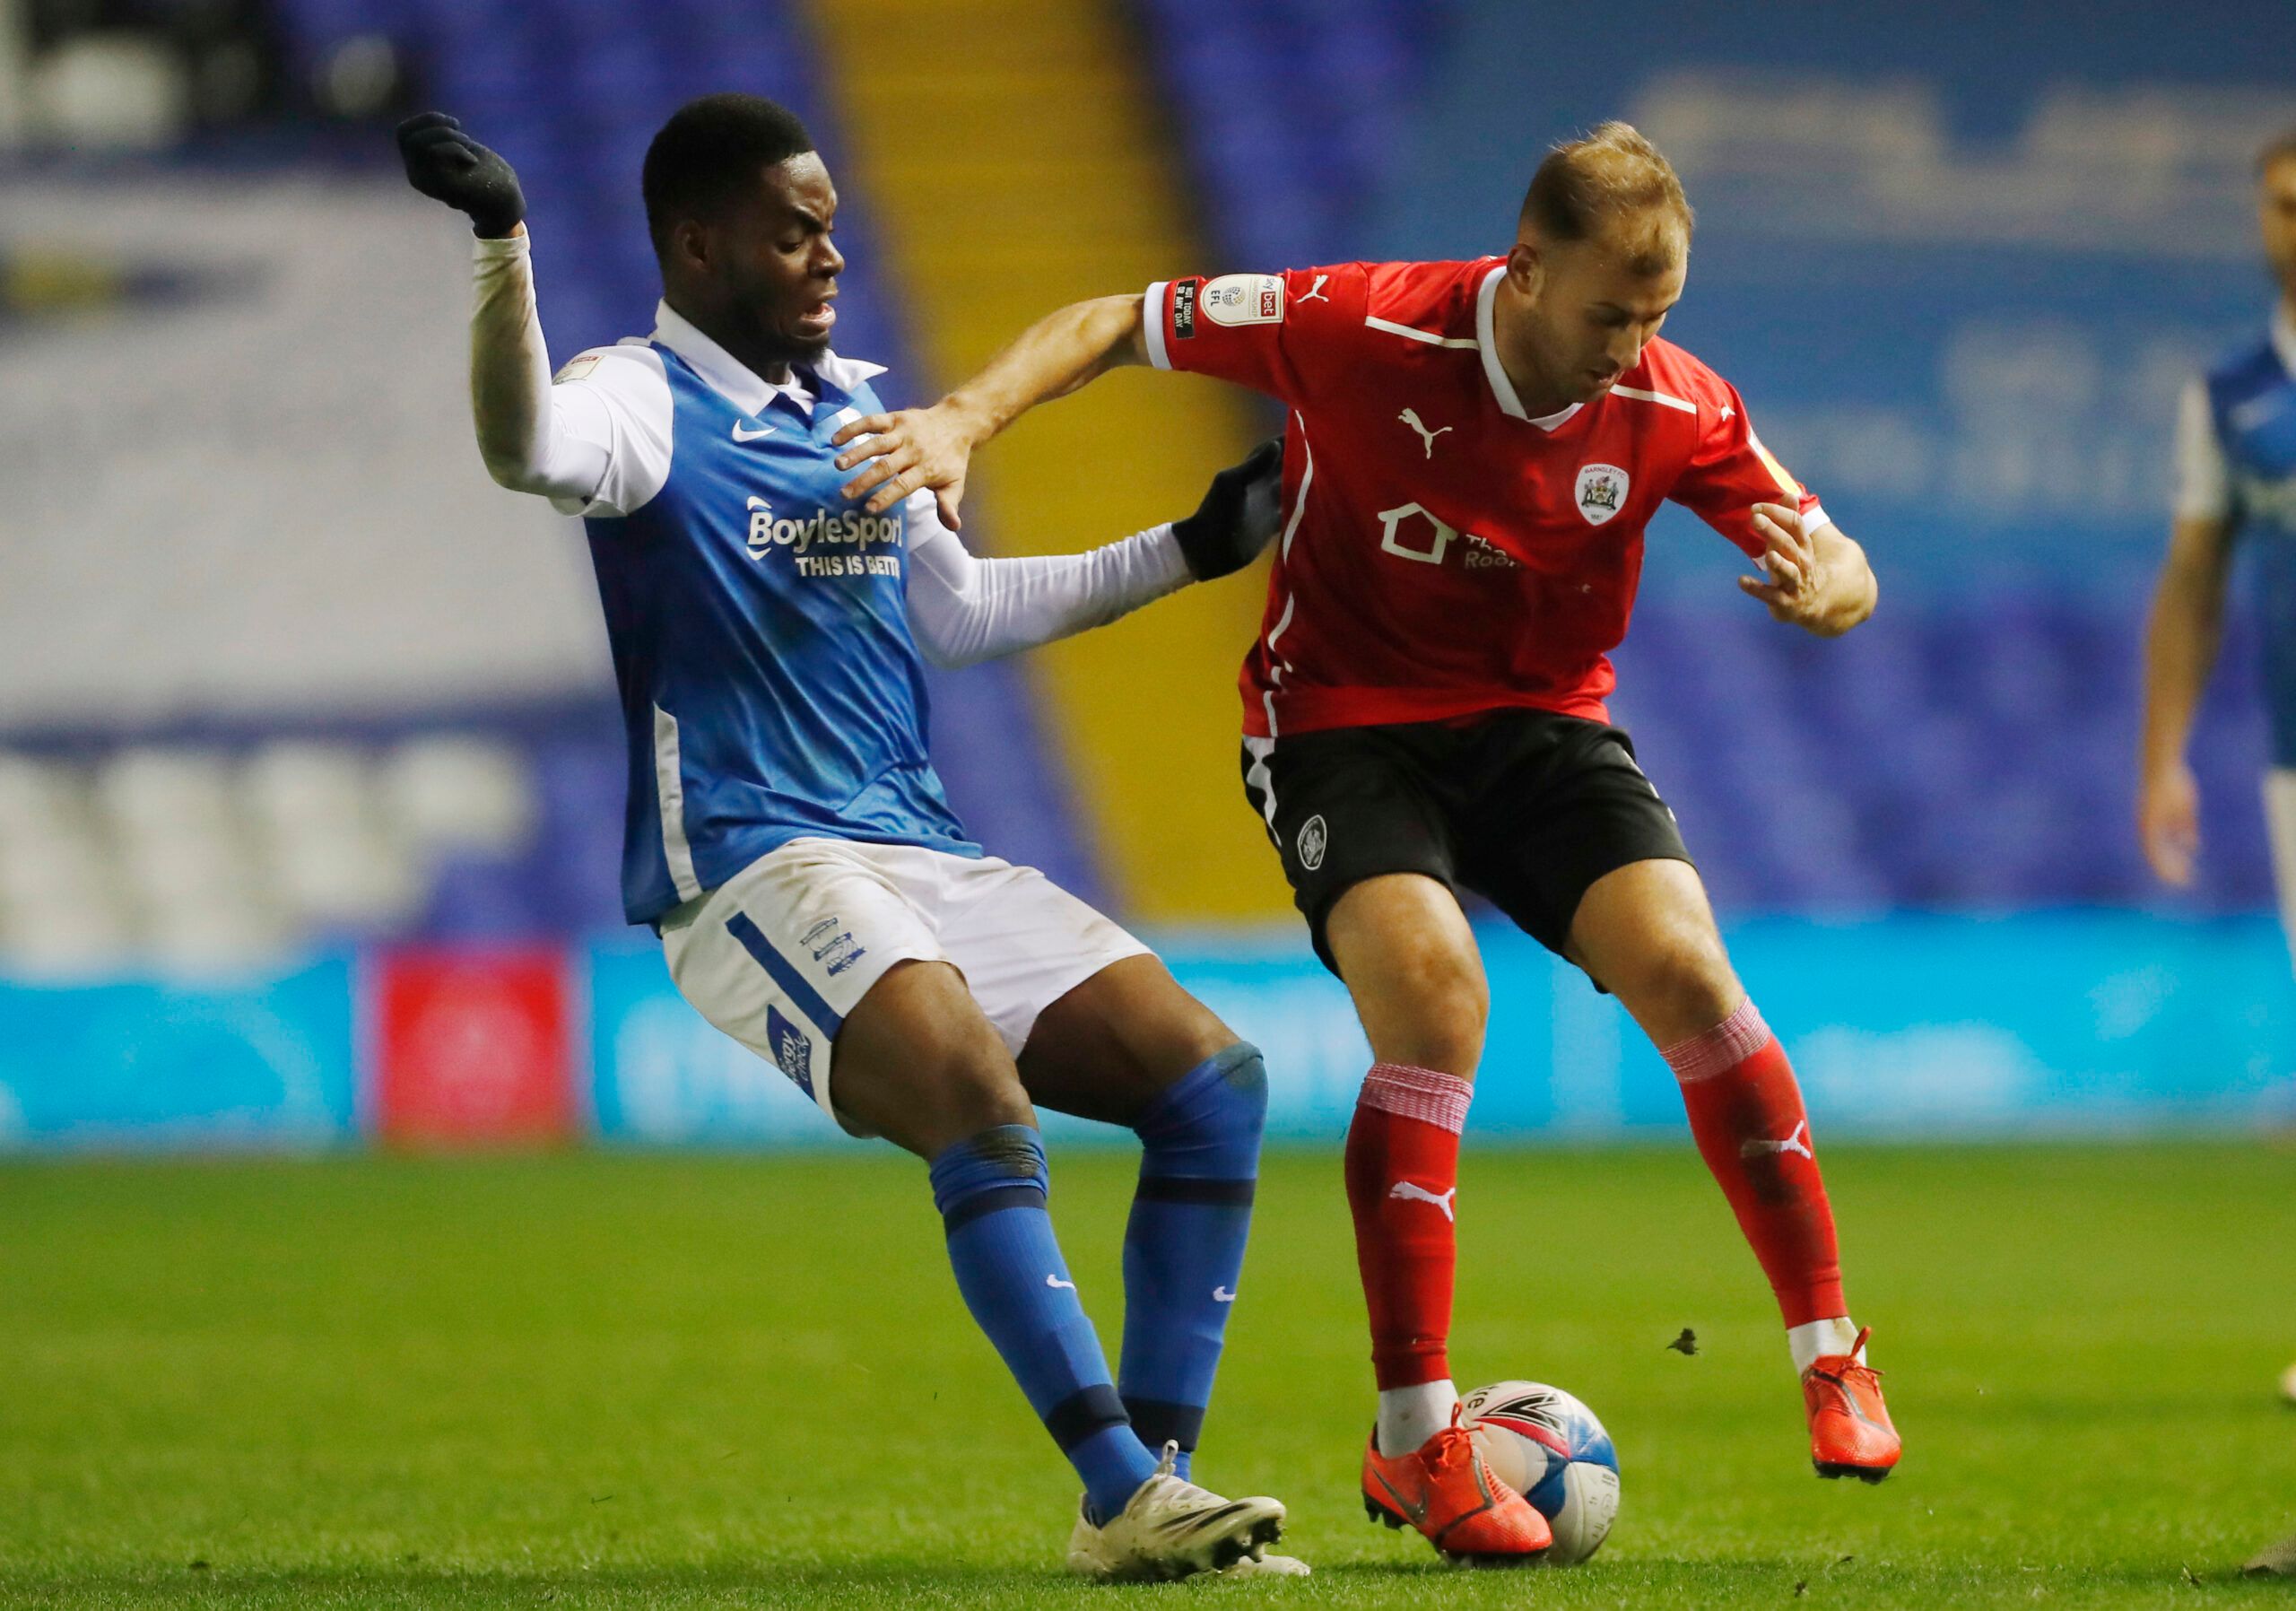 Soccer Football - Championship - Birmingham City v Barnsley - St Andrew's, Birmingham, Britain - December 1, 2020 Birmingham City's Jonathan Leko in action with Barnsley's Herbie Kane Action Images/Matthew Childs EDITORIAL USE ONLY. No use with unauthorized audio, video, data, fixture lists, club/league logos or 'live' services. Online in-match use limited to 75 images, no video emulation. No use in betting, games or single club /league/player publications.  Please contact your account represent